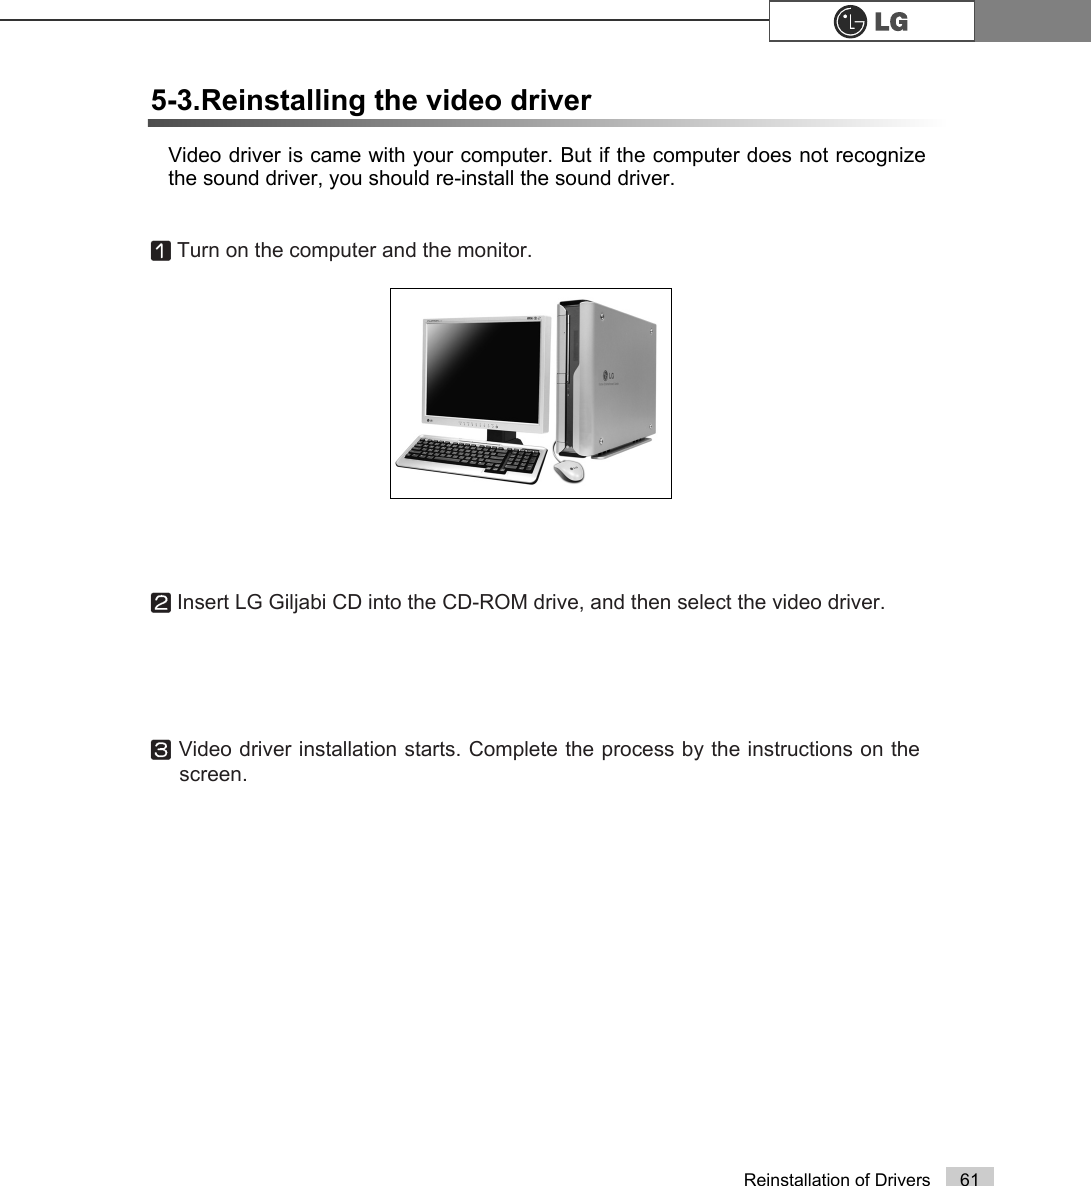 61Reinstallation of DriversVideo driver is came with your computer. But if the computer does not recognizethe sound driver, you should re-install the sound driver.5-3.Reinstalling the video driverⓞTurn on the computer and the monitor.ⓟInsert LG Giljabi CD into the CD-ROM drive, and then select the video driver.ⓠVideo driver installation starts. Complete the process by the instructions on thescreen.